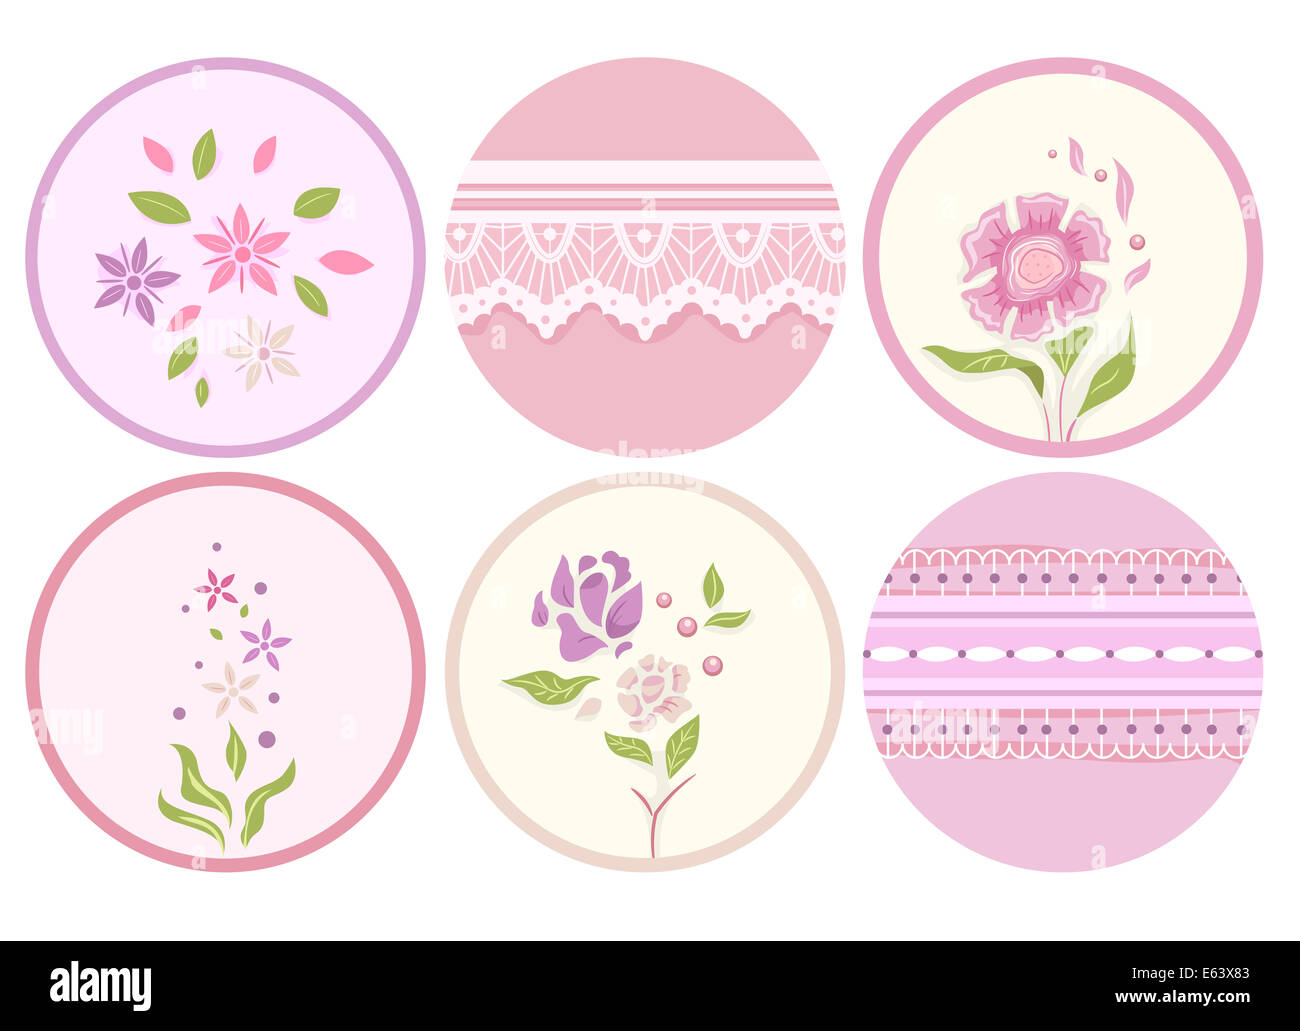 Illustration of Ready to Print Labels with a Shabby Chic Design Stock Photo